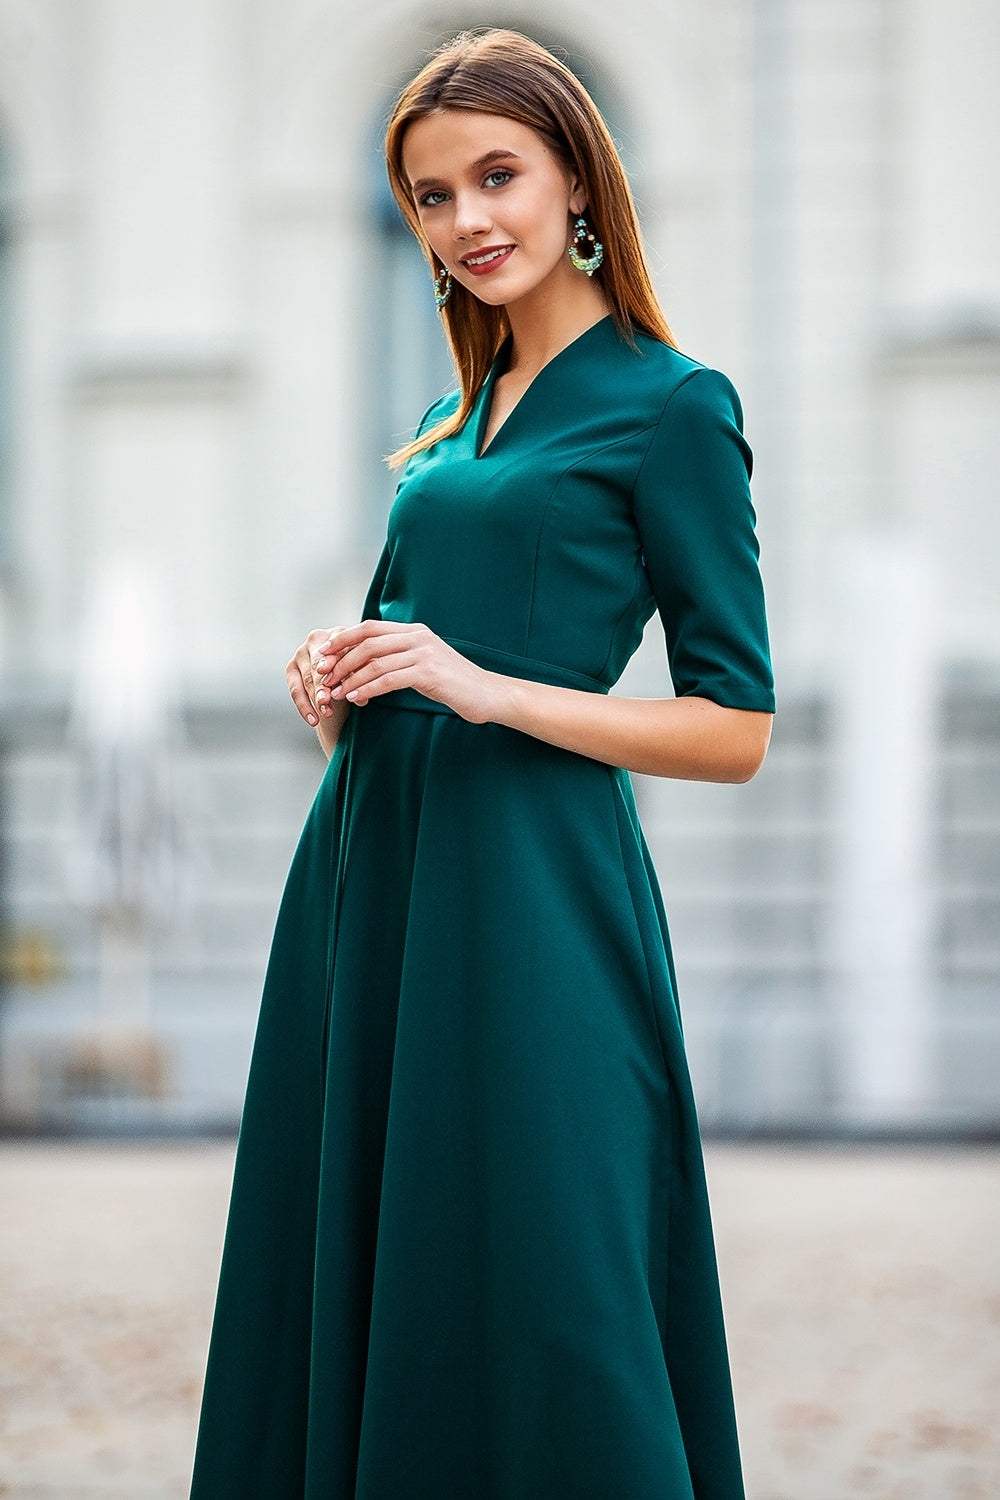 Classic dark green maxi dress with circle skirt and separated belt